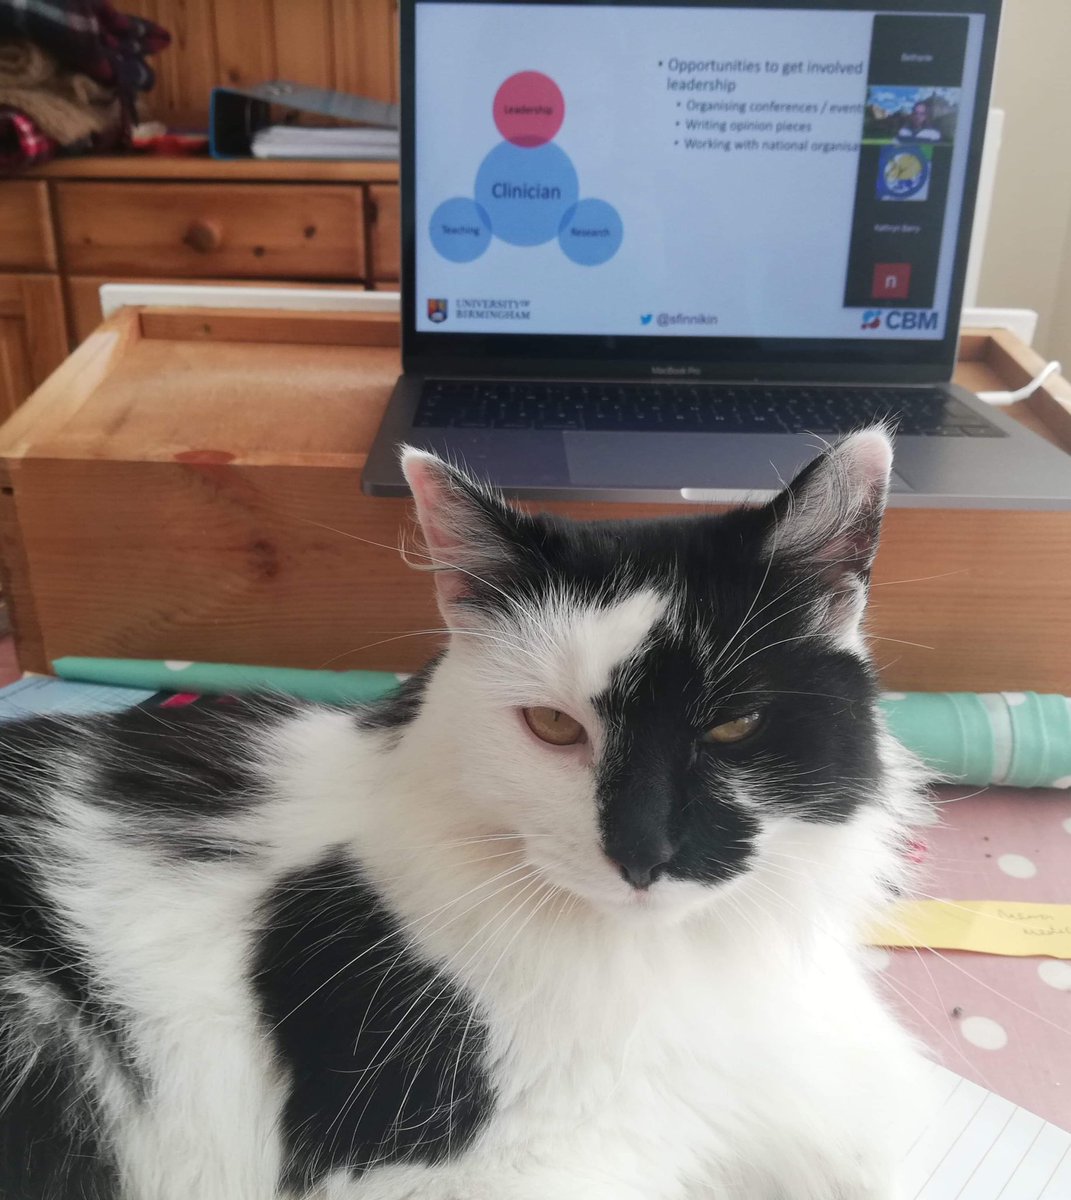 Attending a brilliant zoom conference about General Practice today by UoB GP society with my cat Dottie #universityofbirmingham #UoB #generalpractice #generalpracticesociety #GP #GPNurse